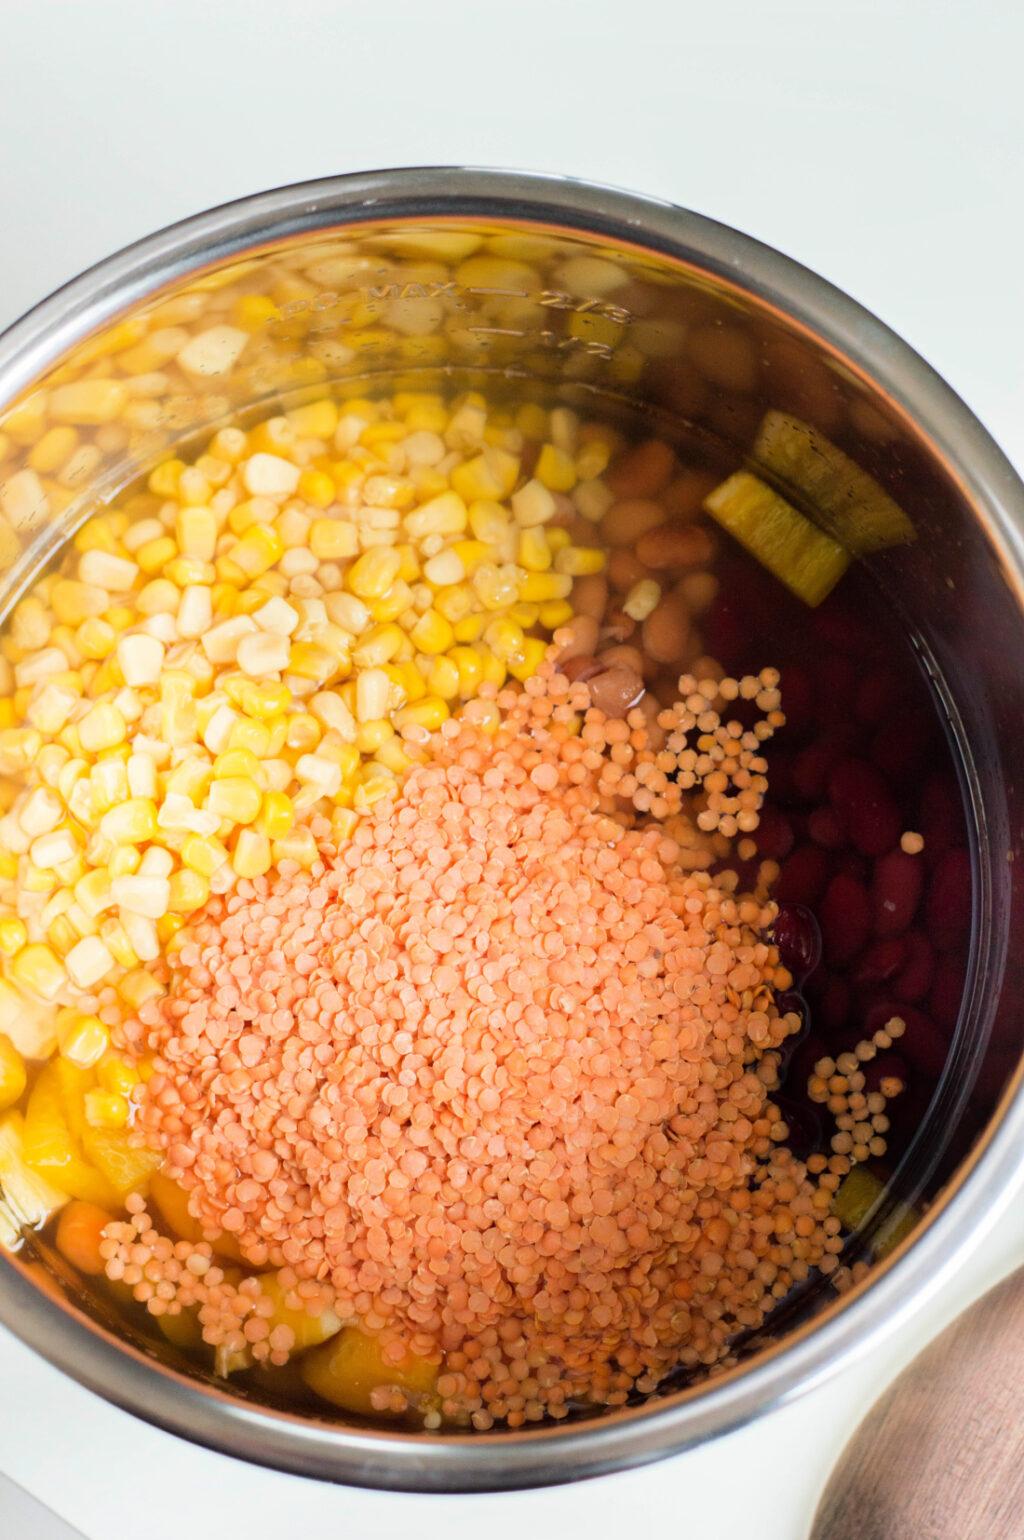 A cooking pot filled with vegetarian instant pot chili, featuring layers of red beans, orange lentils, and yellow corn on a stove.